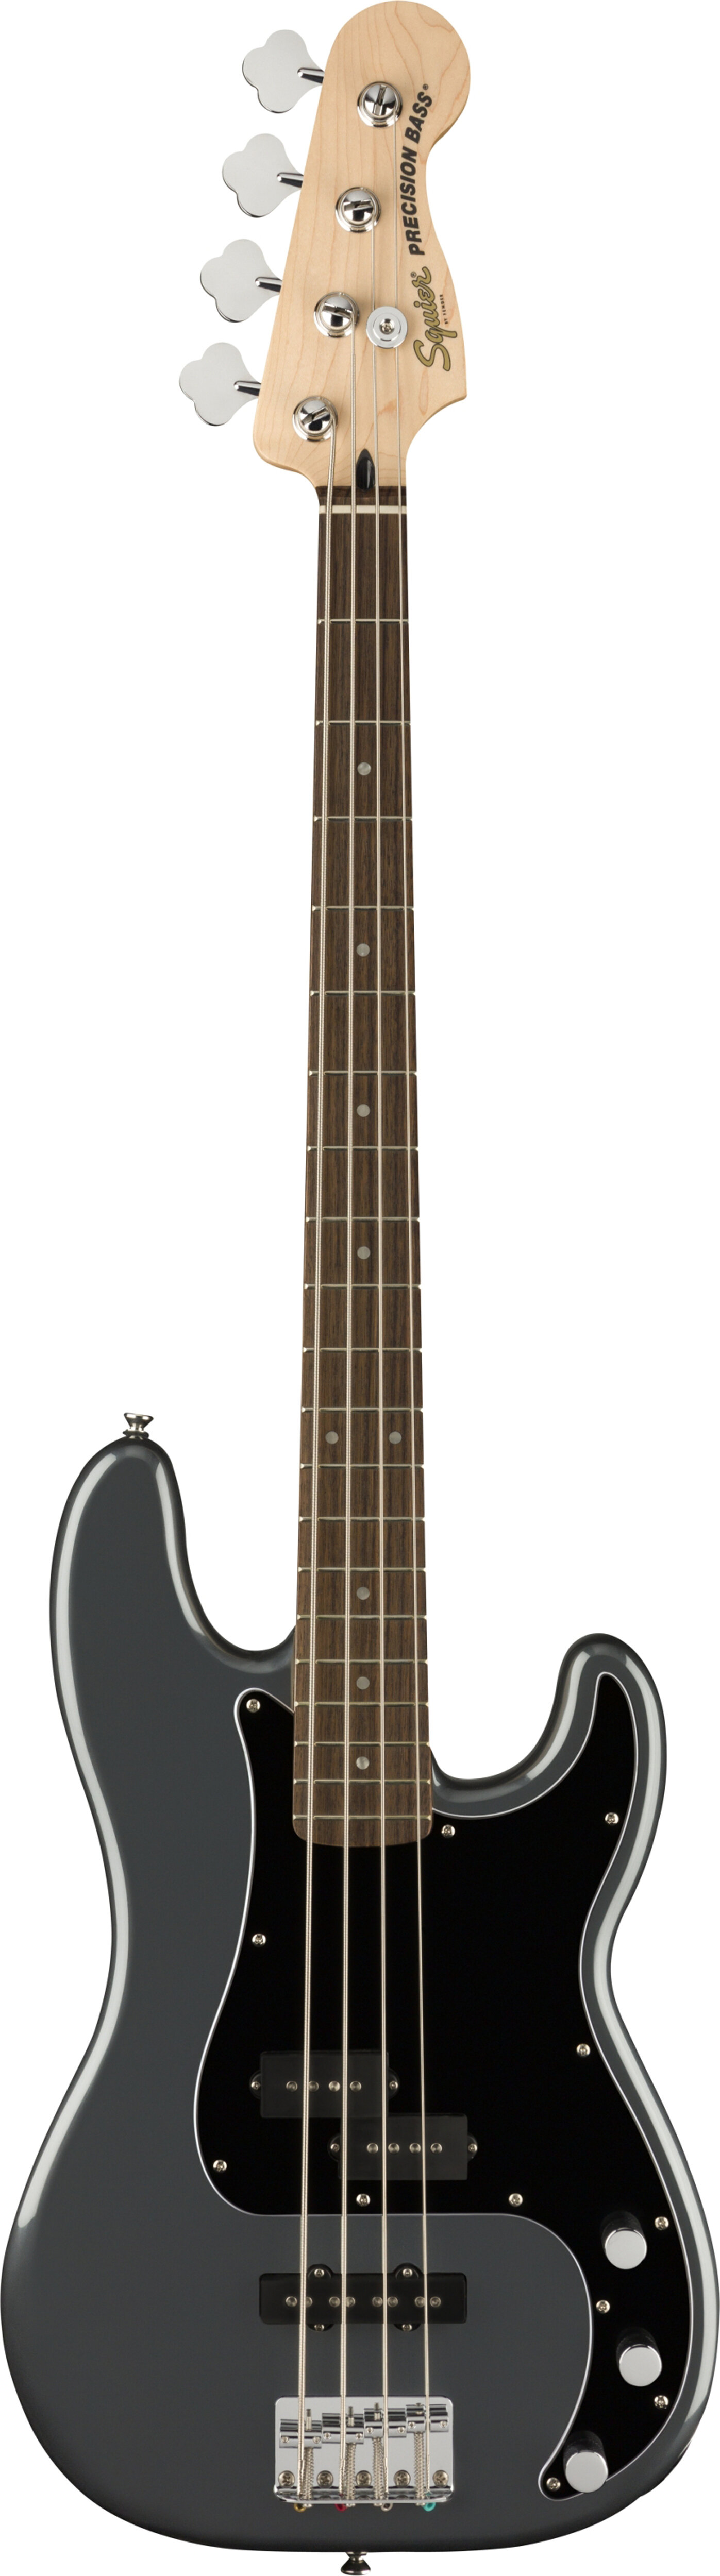 Squier Affinity Precis Bass PJ LN Charcoal Frost -  0378551569